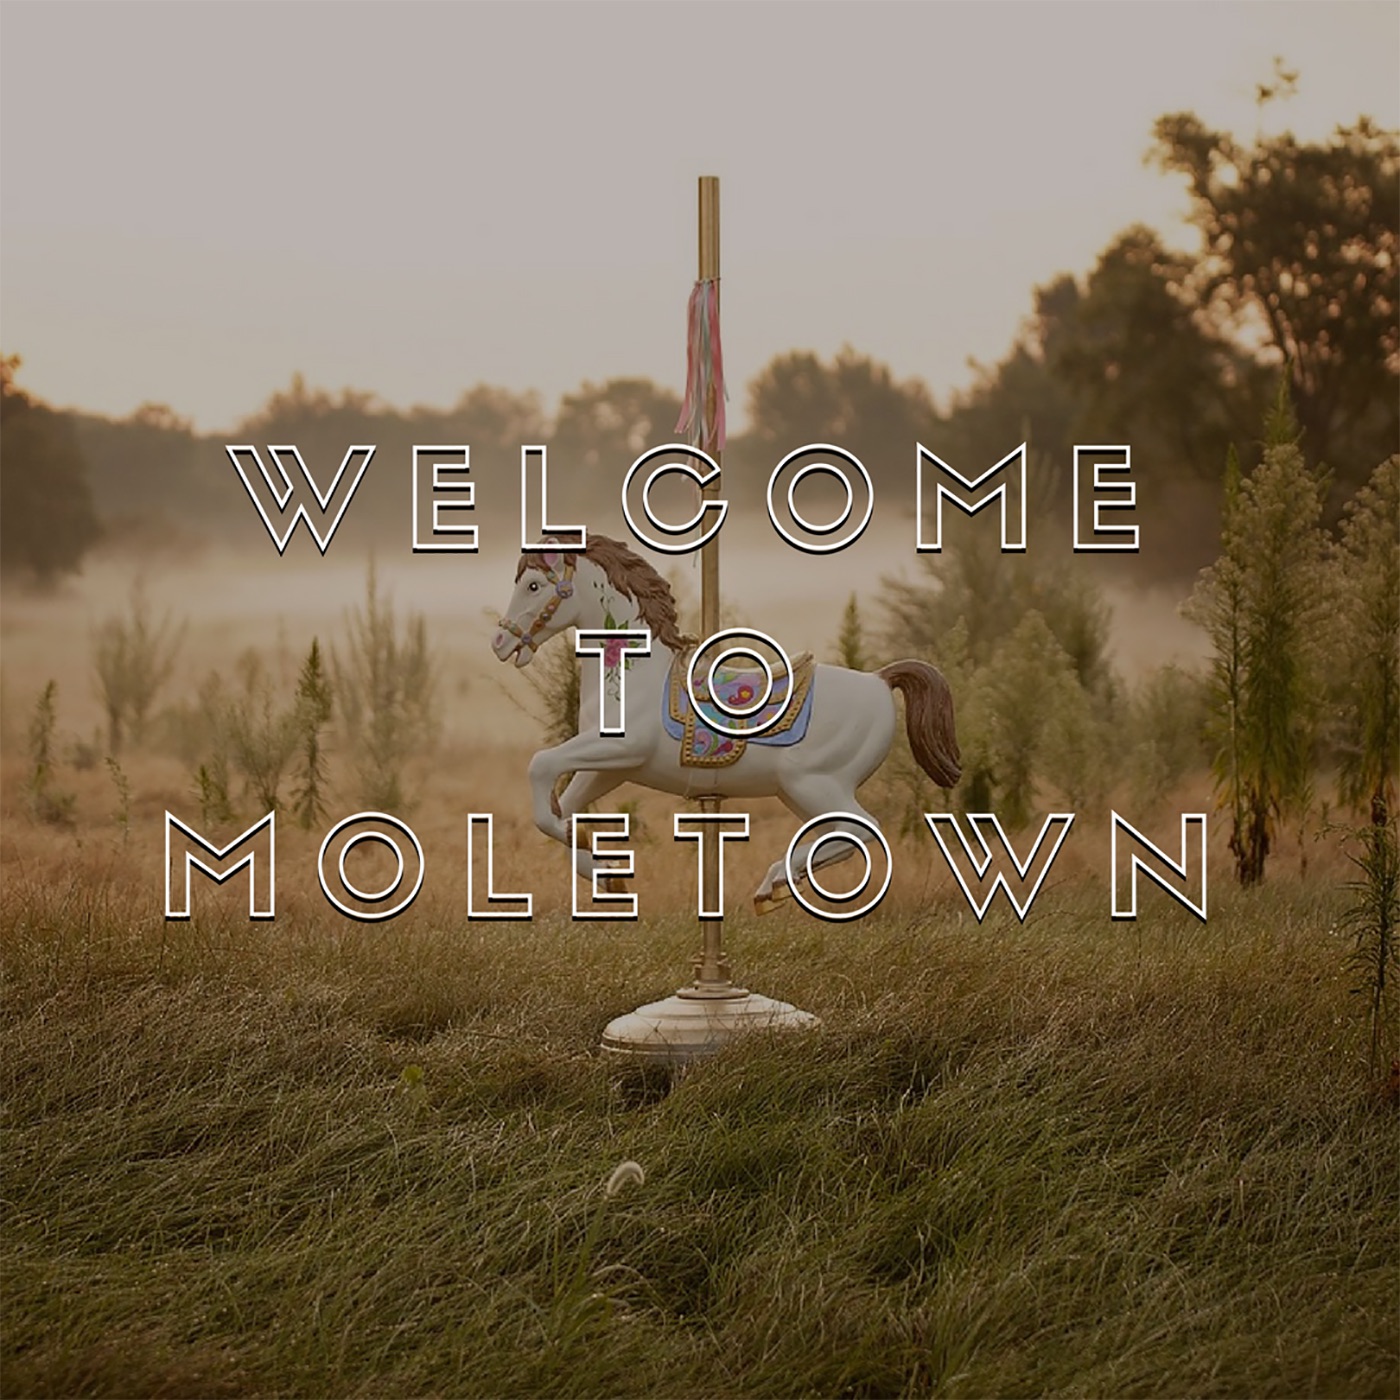 1. Welcome to Moletown